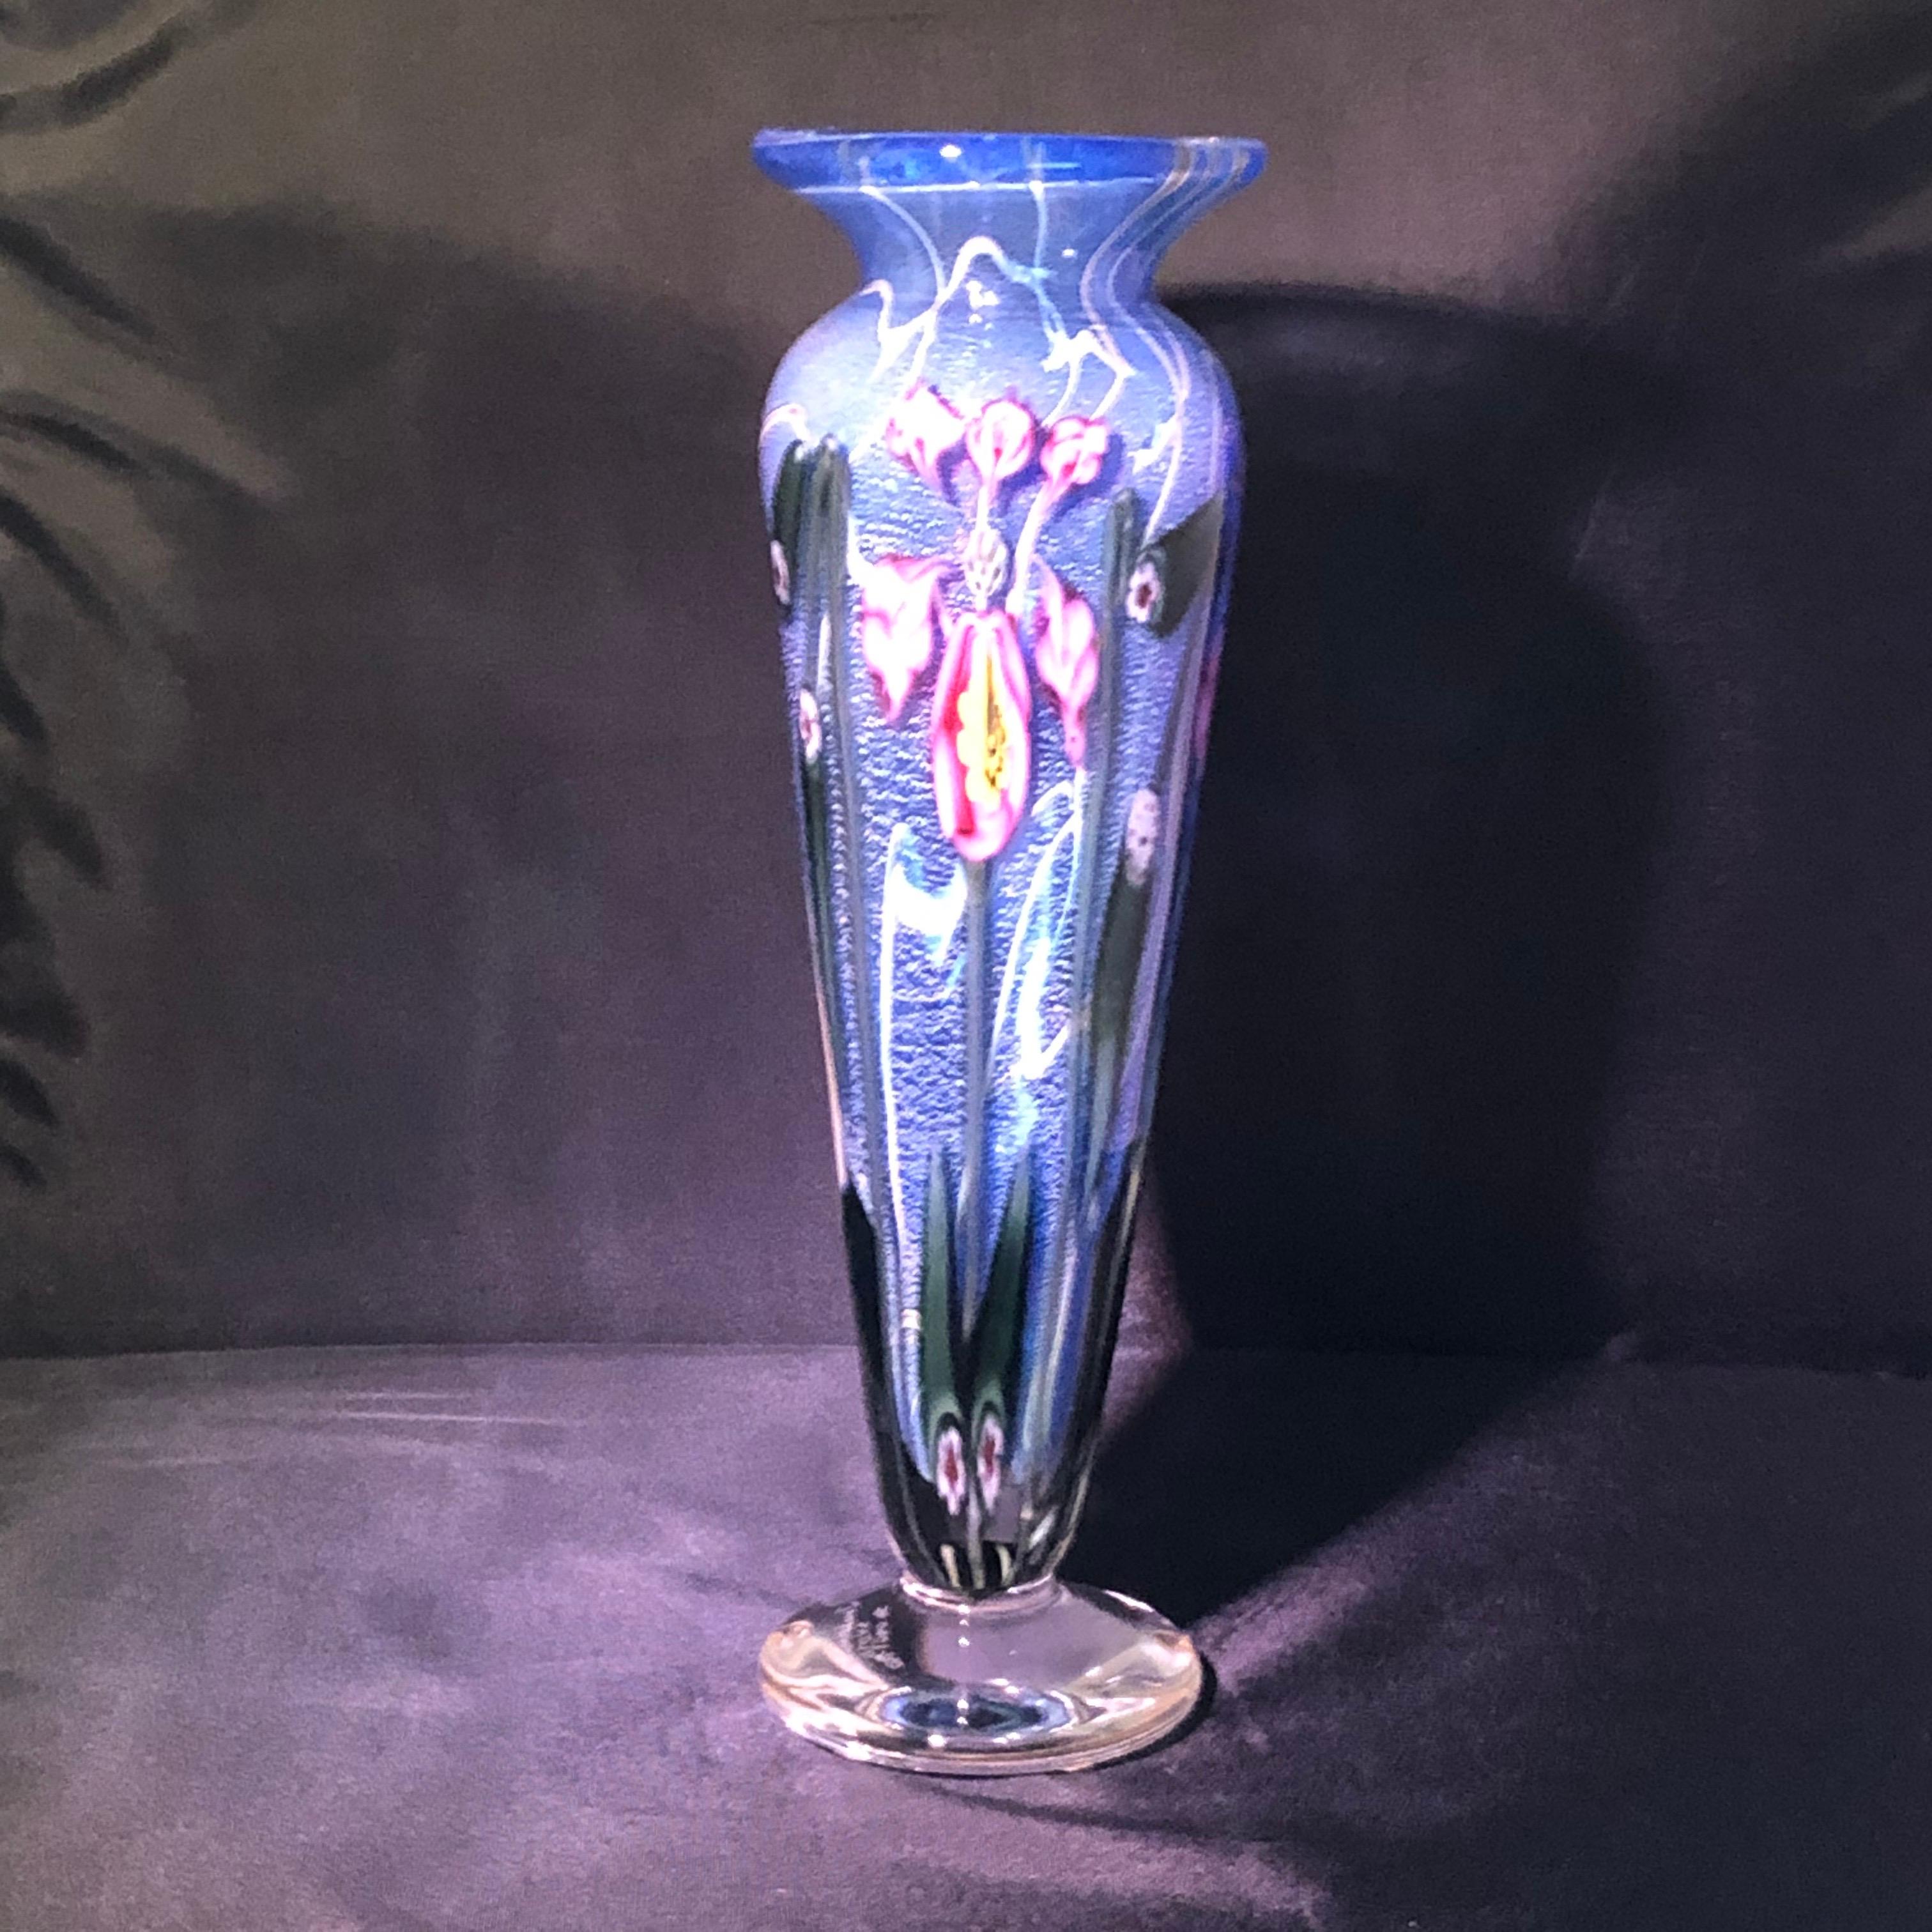 Hand blown Vandermark art glass vase decorated with beautiful pink exotic flowers on a blue colored background. It was hand blown so when the light hits it, you can see beautiful shimmering gold speckles throughout the vase. The vase is signed by